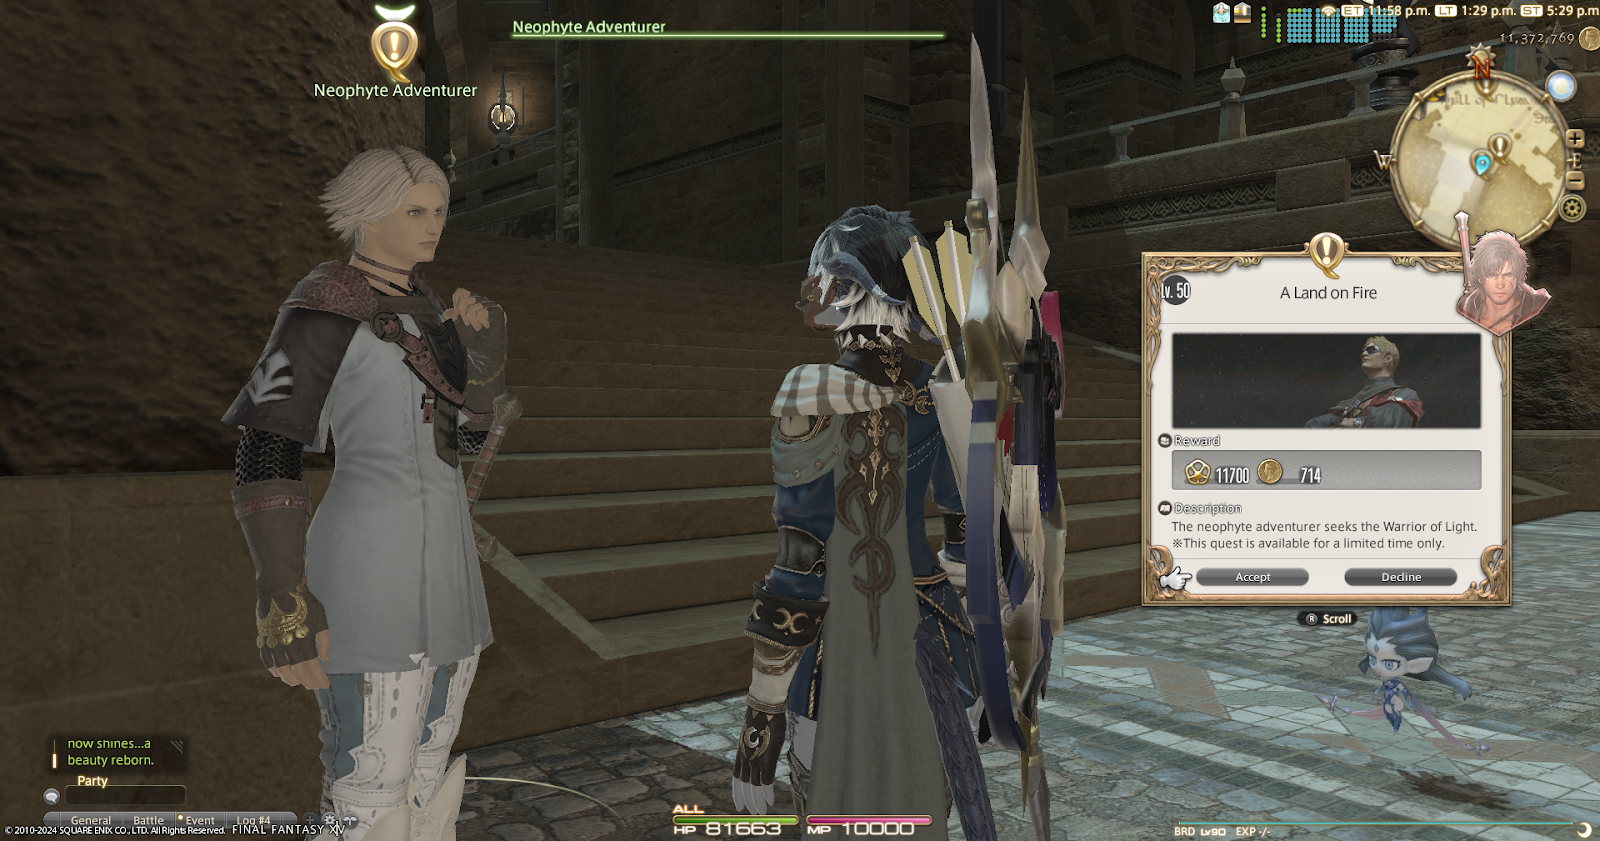 A player character accepts the Final Fantasy XVI collaboration event quest from an NPC in Final Fantasy XIV.